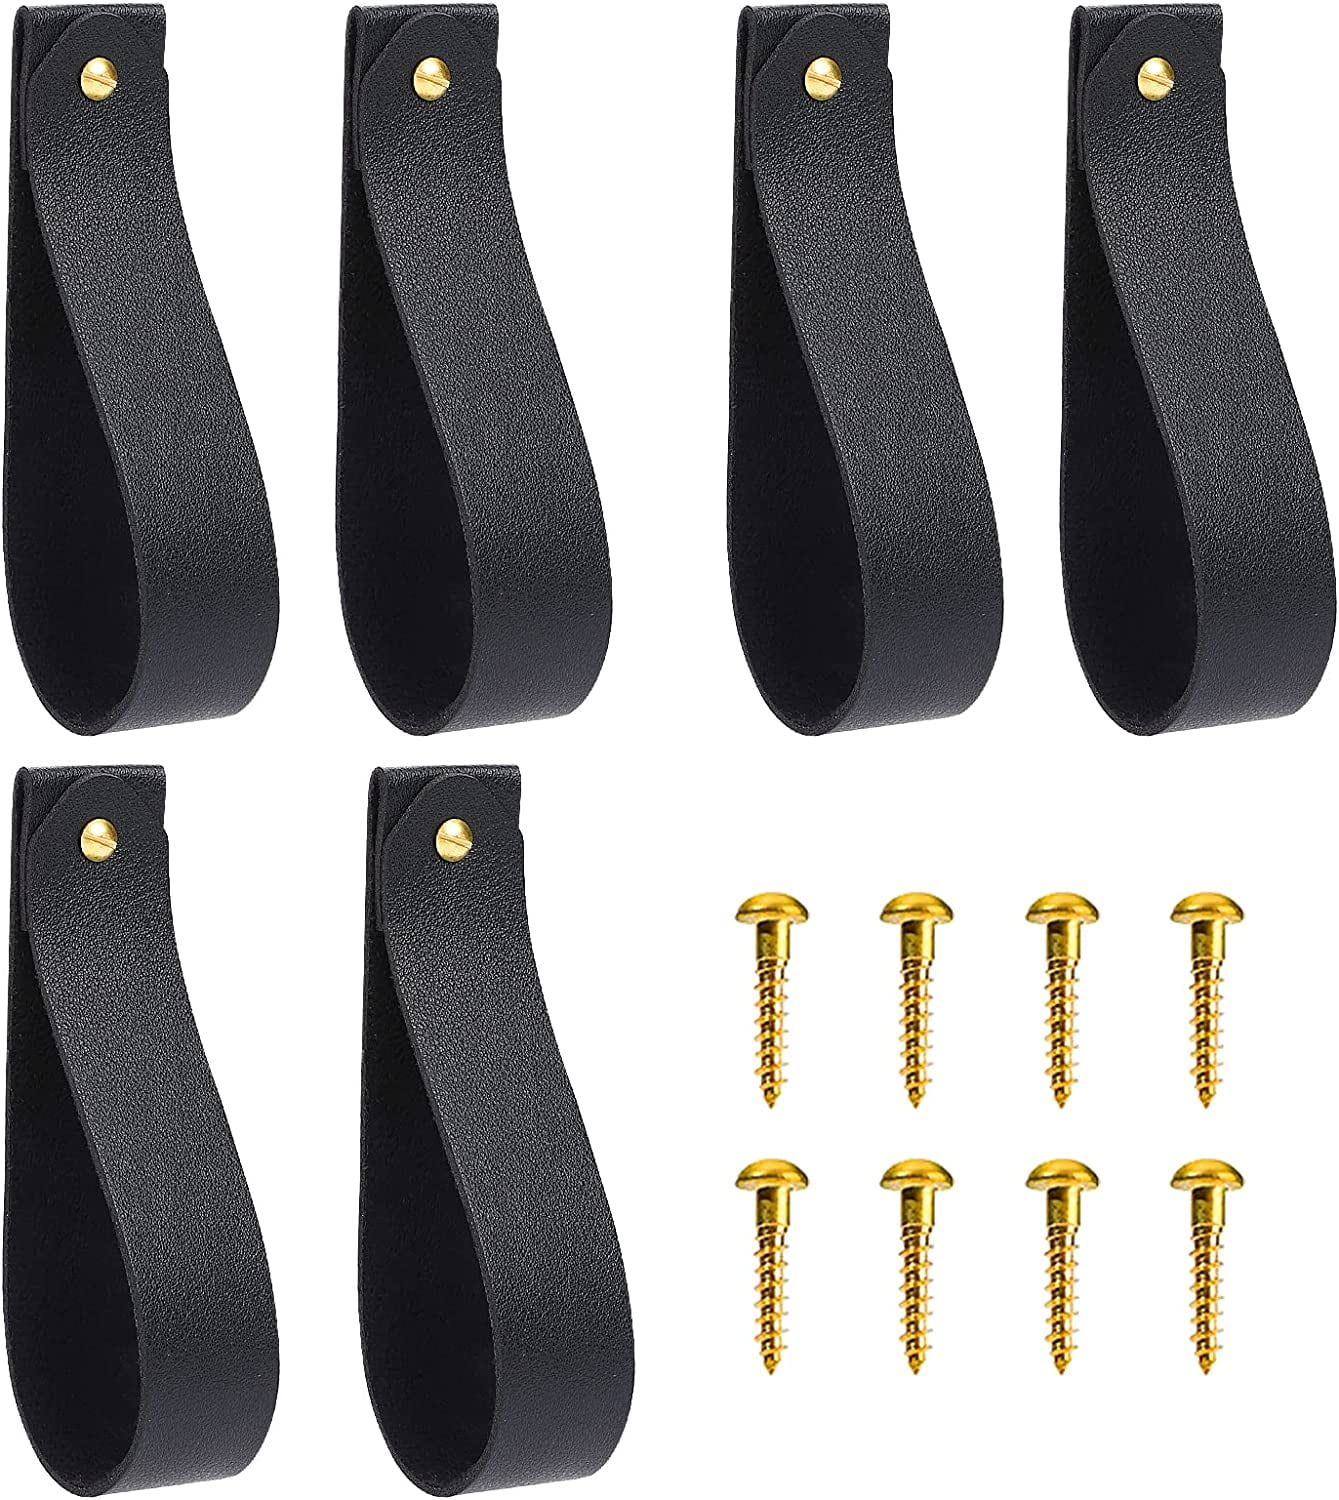 6 Pcs Leather Wall Hooks Wall Hanging Strap Leather Curtain Rod Holder  Leather Straps Hanger Towel Leather Hook for Towel Bathroom Kitchen  Bedroom(Black) 